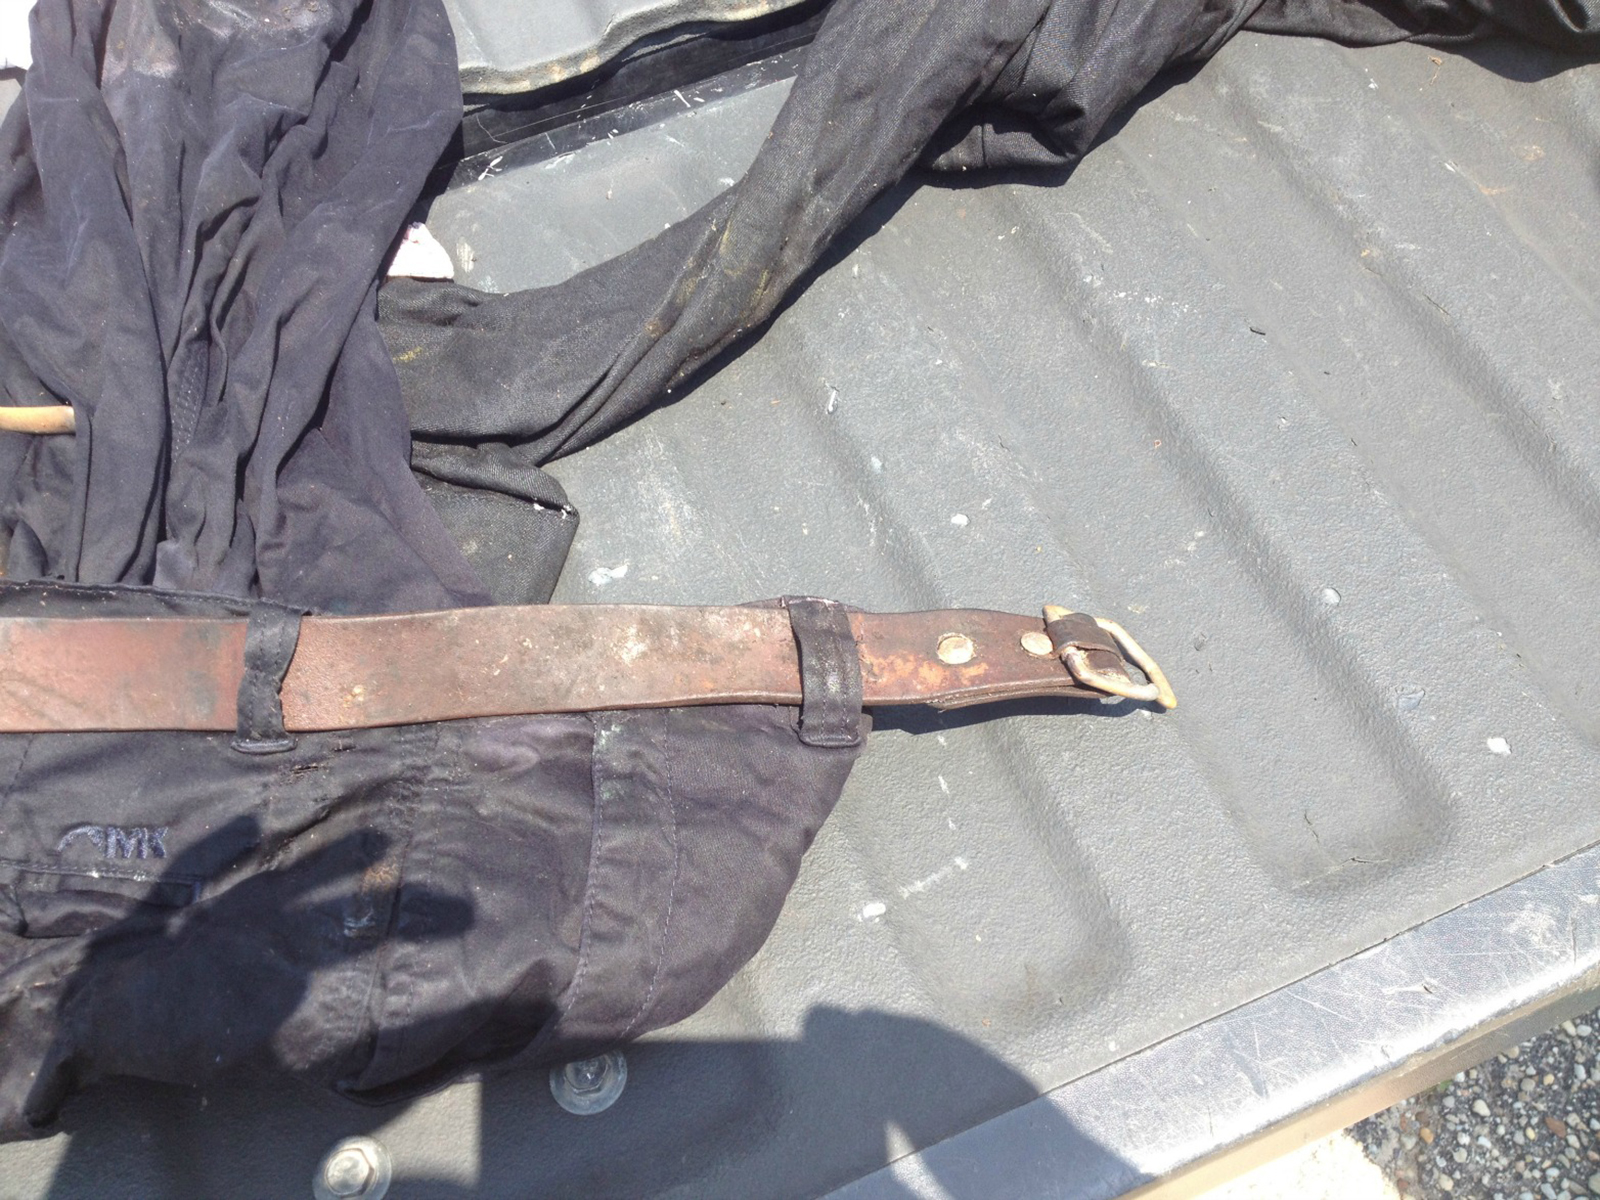 Worn and moldy No. 5 Cinch Belt, looped through belt loops on dirty pants, buckle